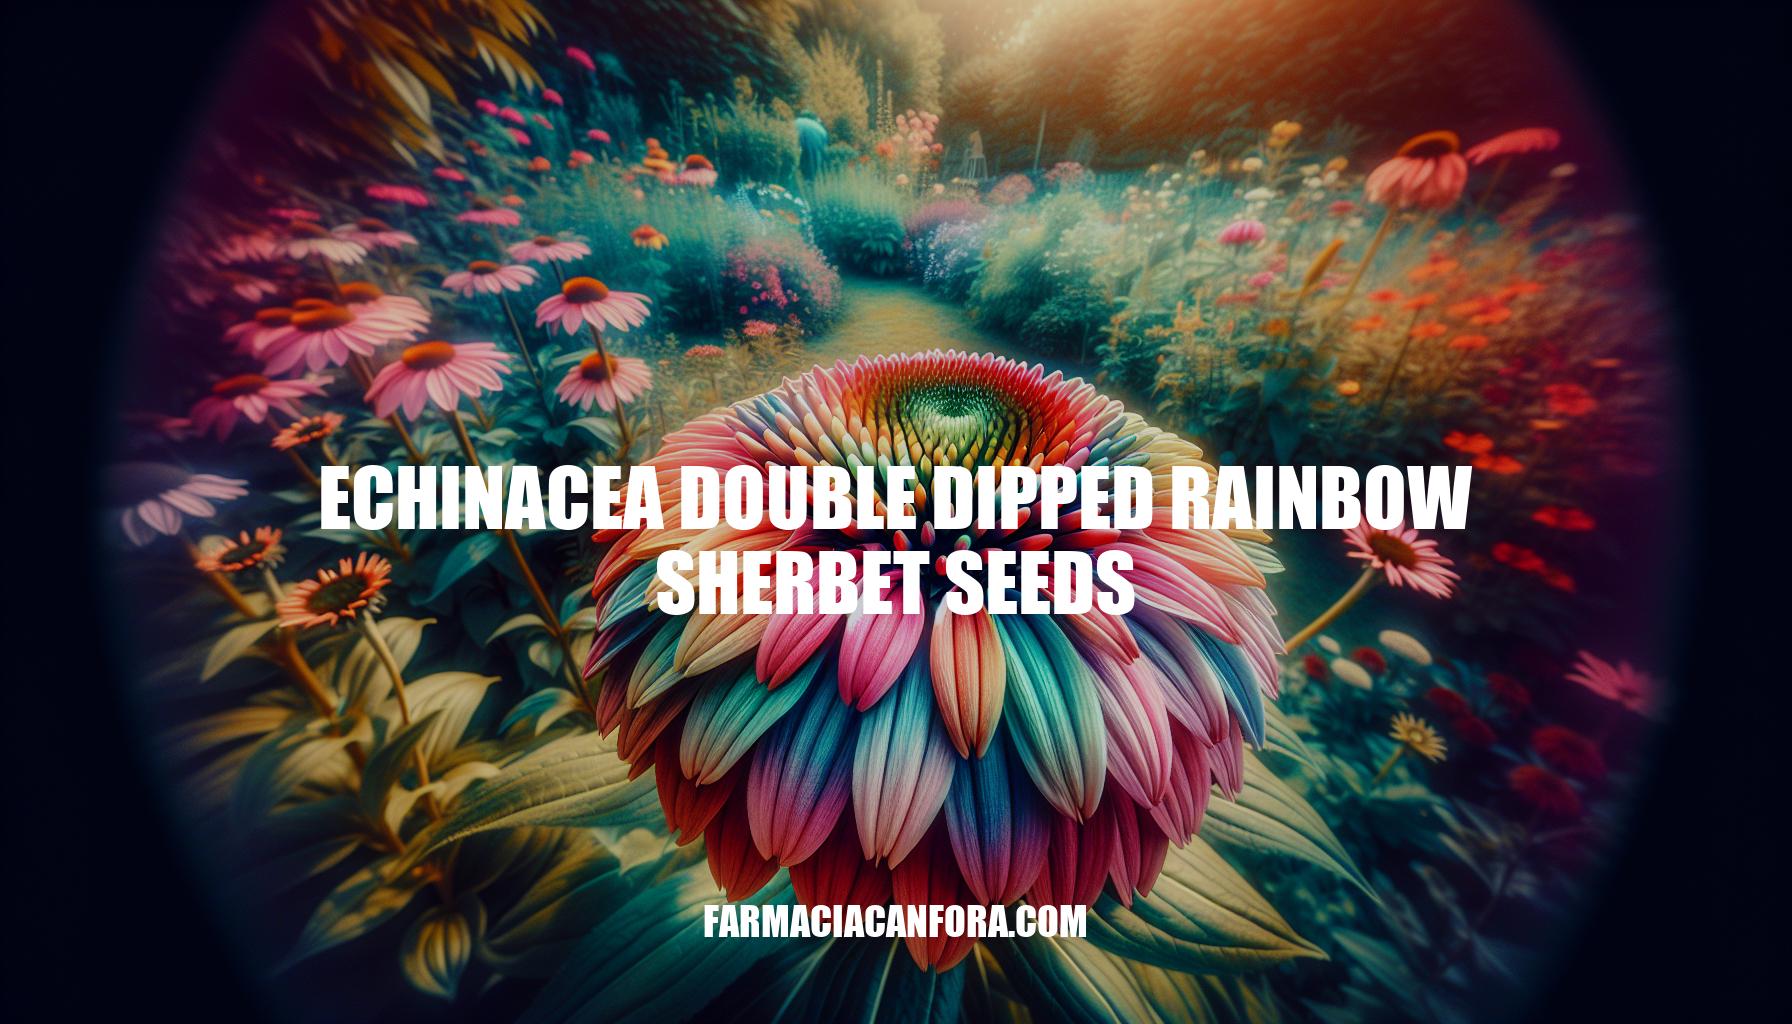 The Beauty and Benefits of Echinacea Double Dipped Rainbow Sherbet Seeds